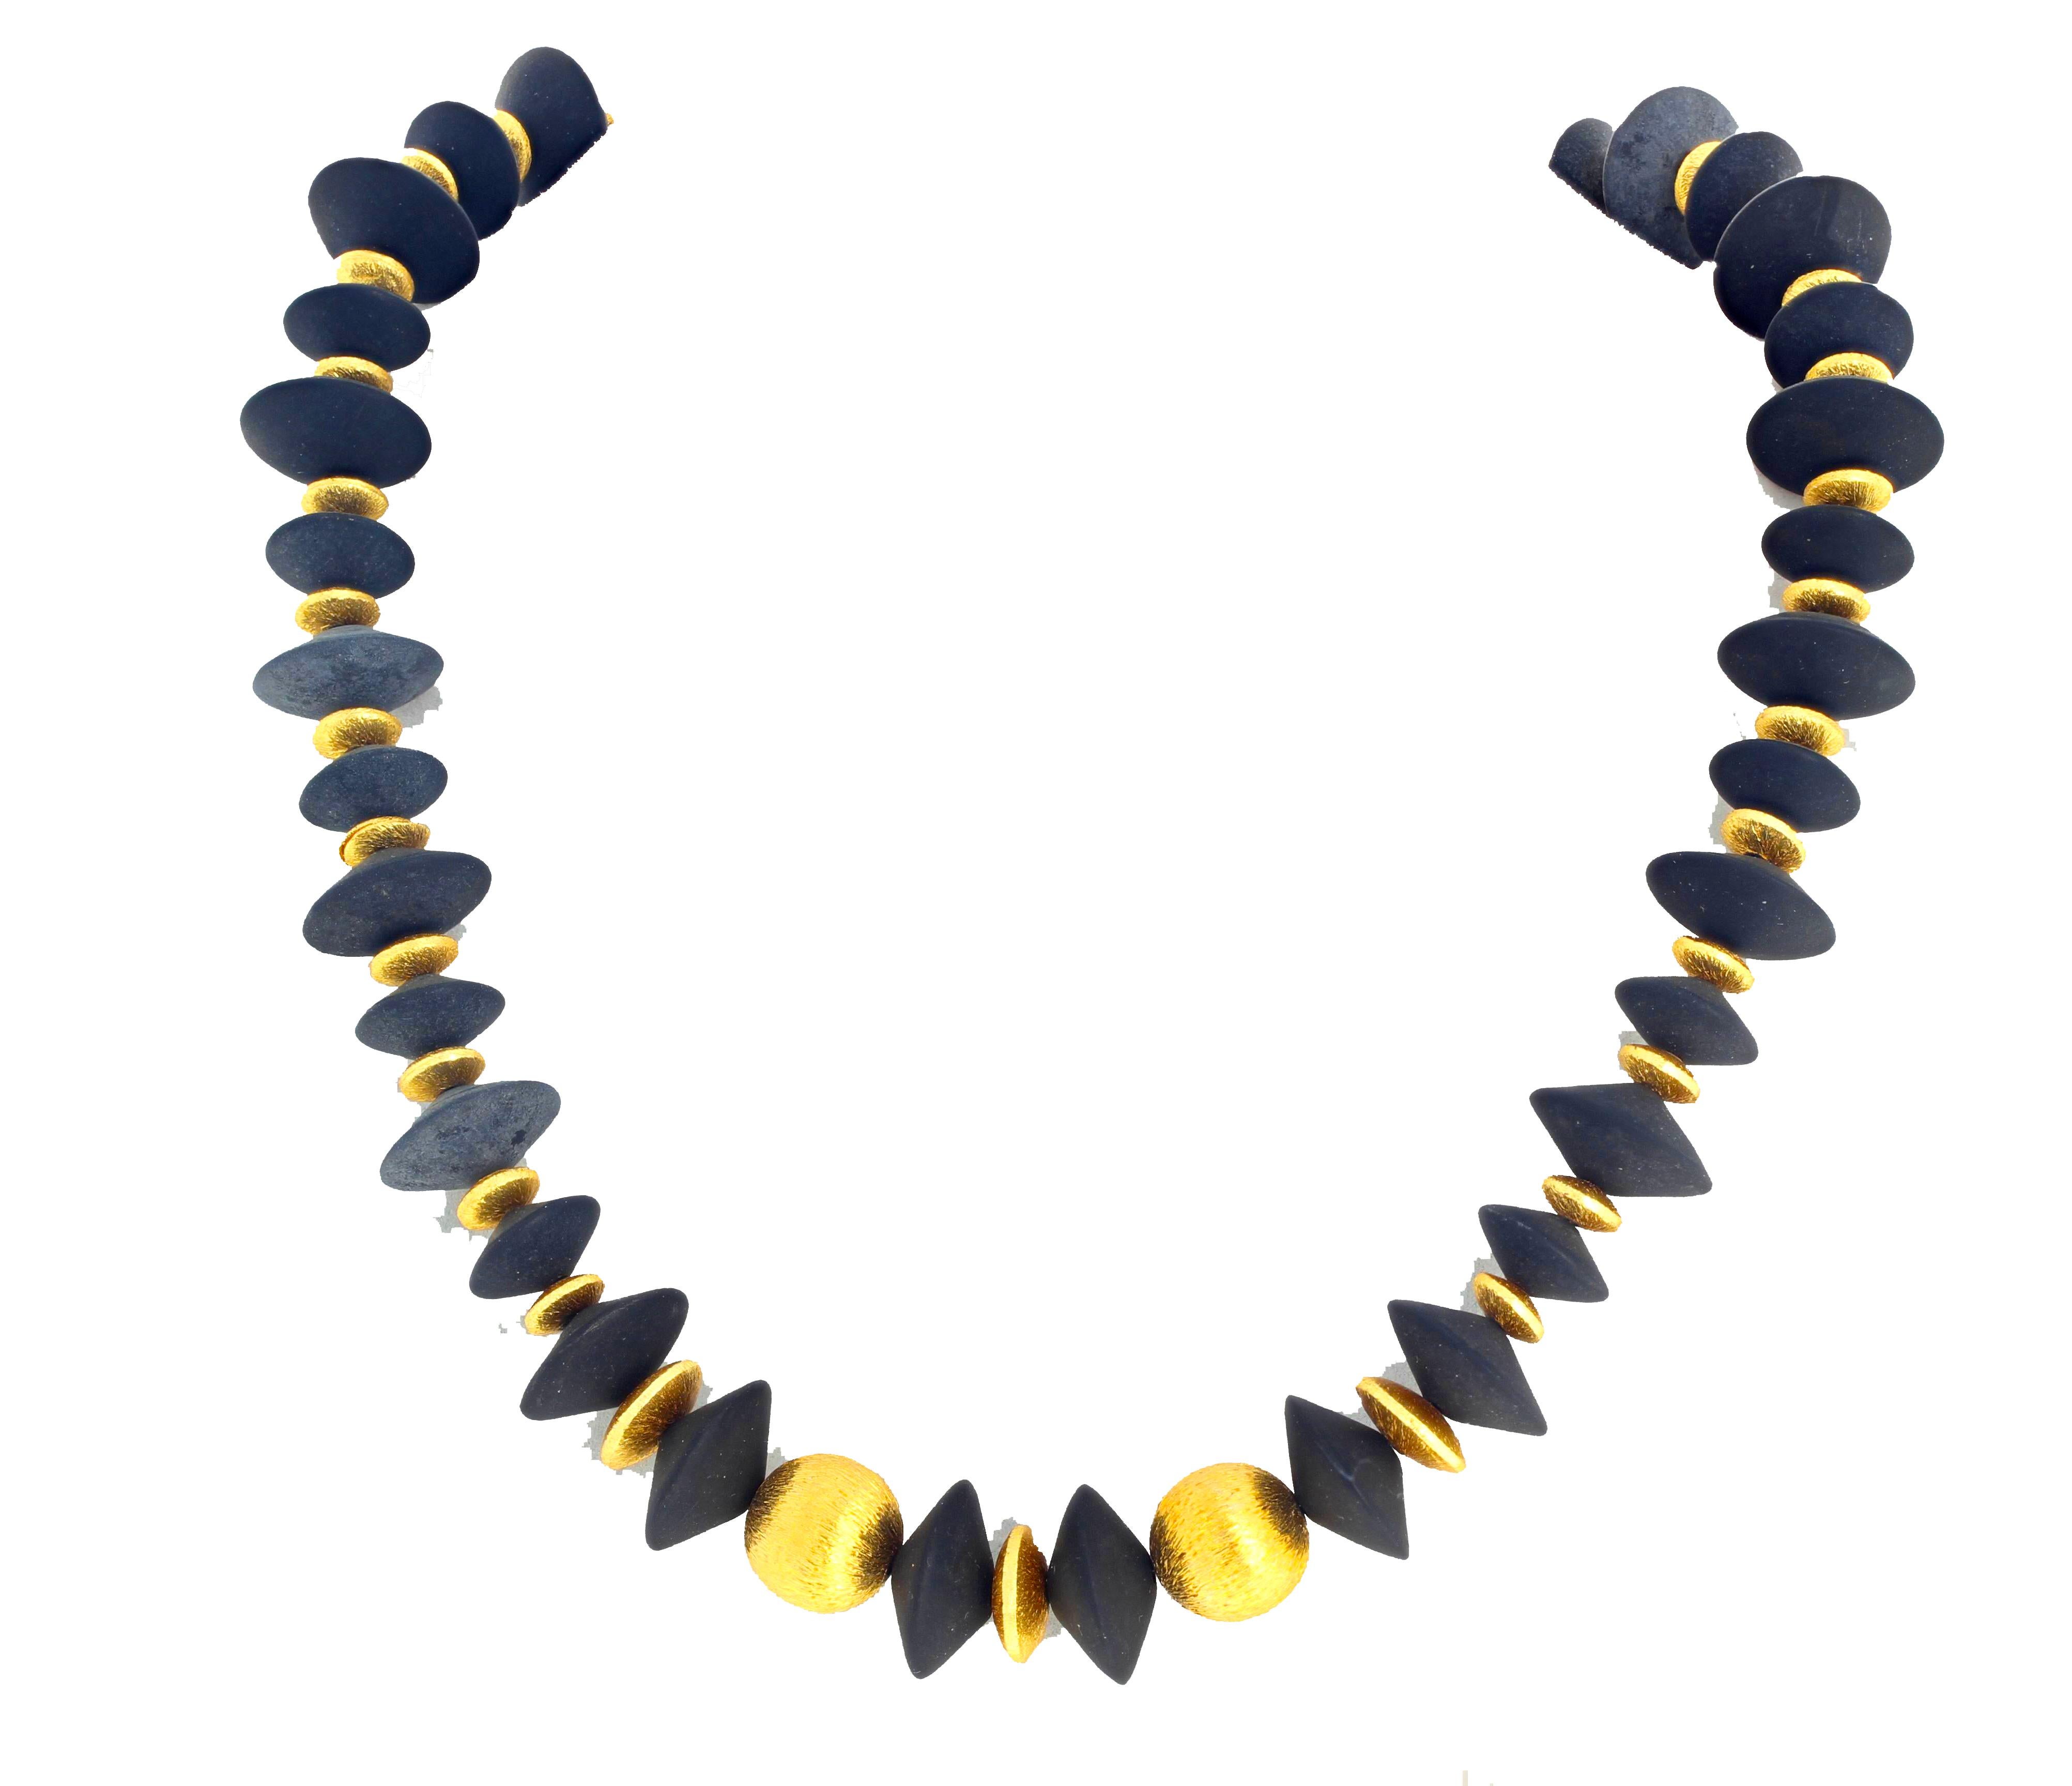 AJD ELEGANT Dramatic Unique Gold Plated Rondels & Black Onyx Necklace In New Condition For Sale In Raleigh, NC